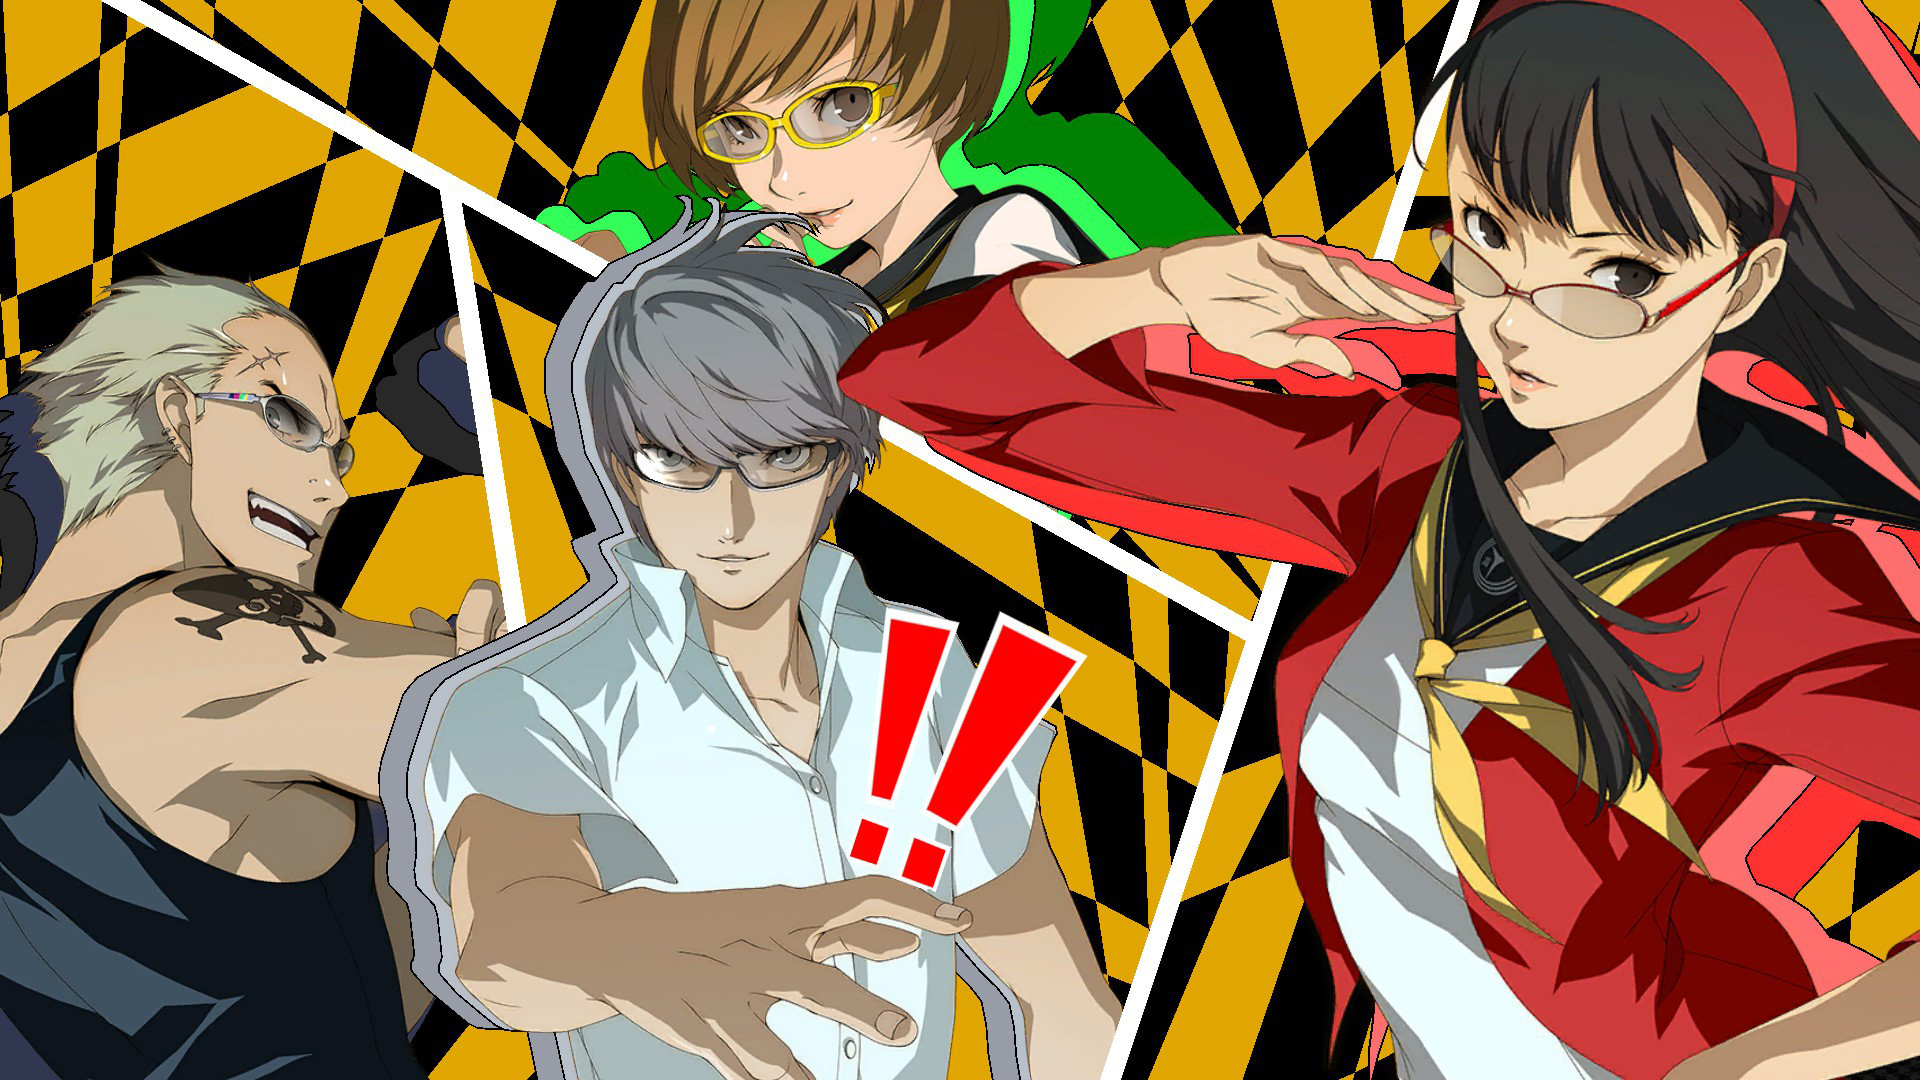 Atlus Drops Persona 4 Golden Patch 1.1 With Major Fixes And Cutscene Optimization